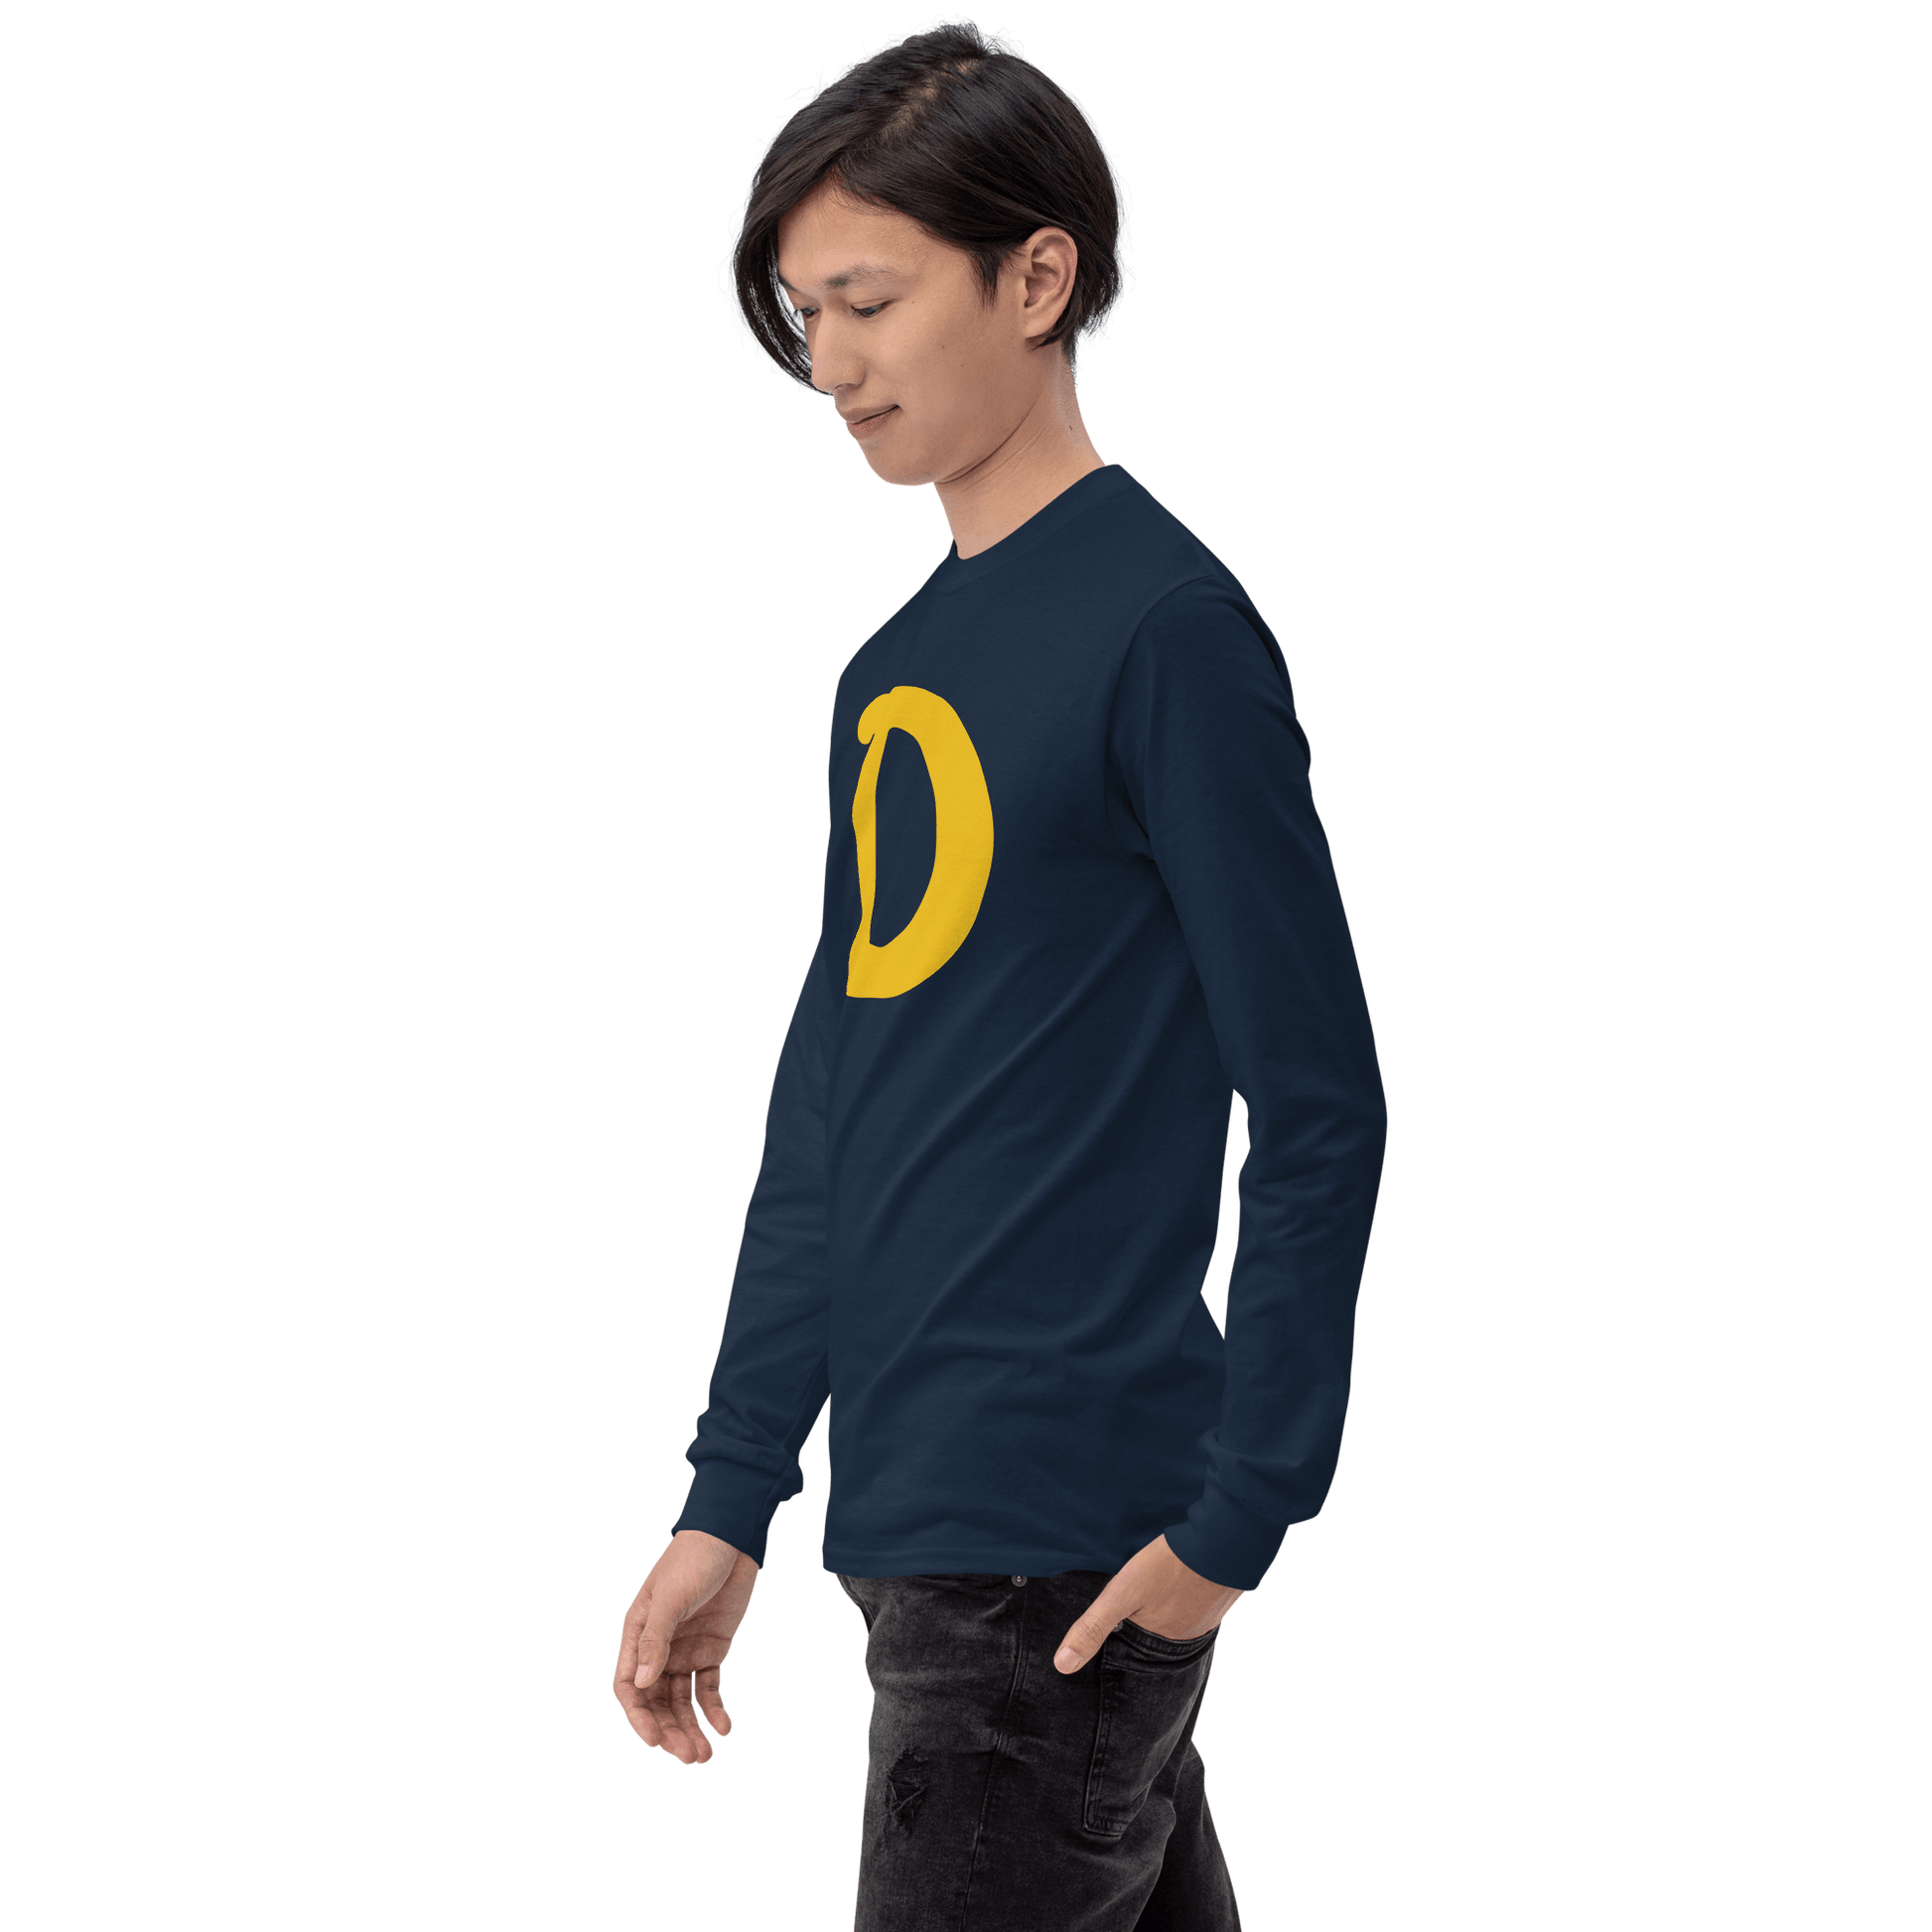 Detroit 'Old French D' T-Shirt (Gold Full Body Outline) | Unisex Long Sleeve - Circumspice Michigan